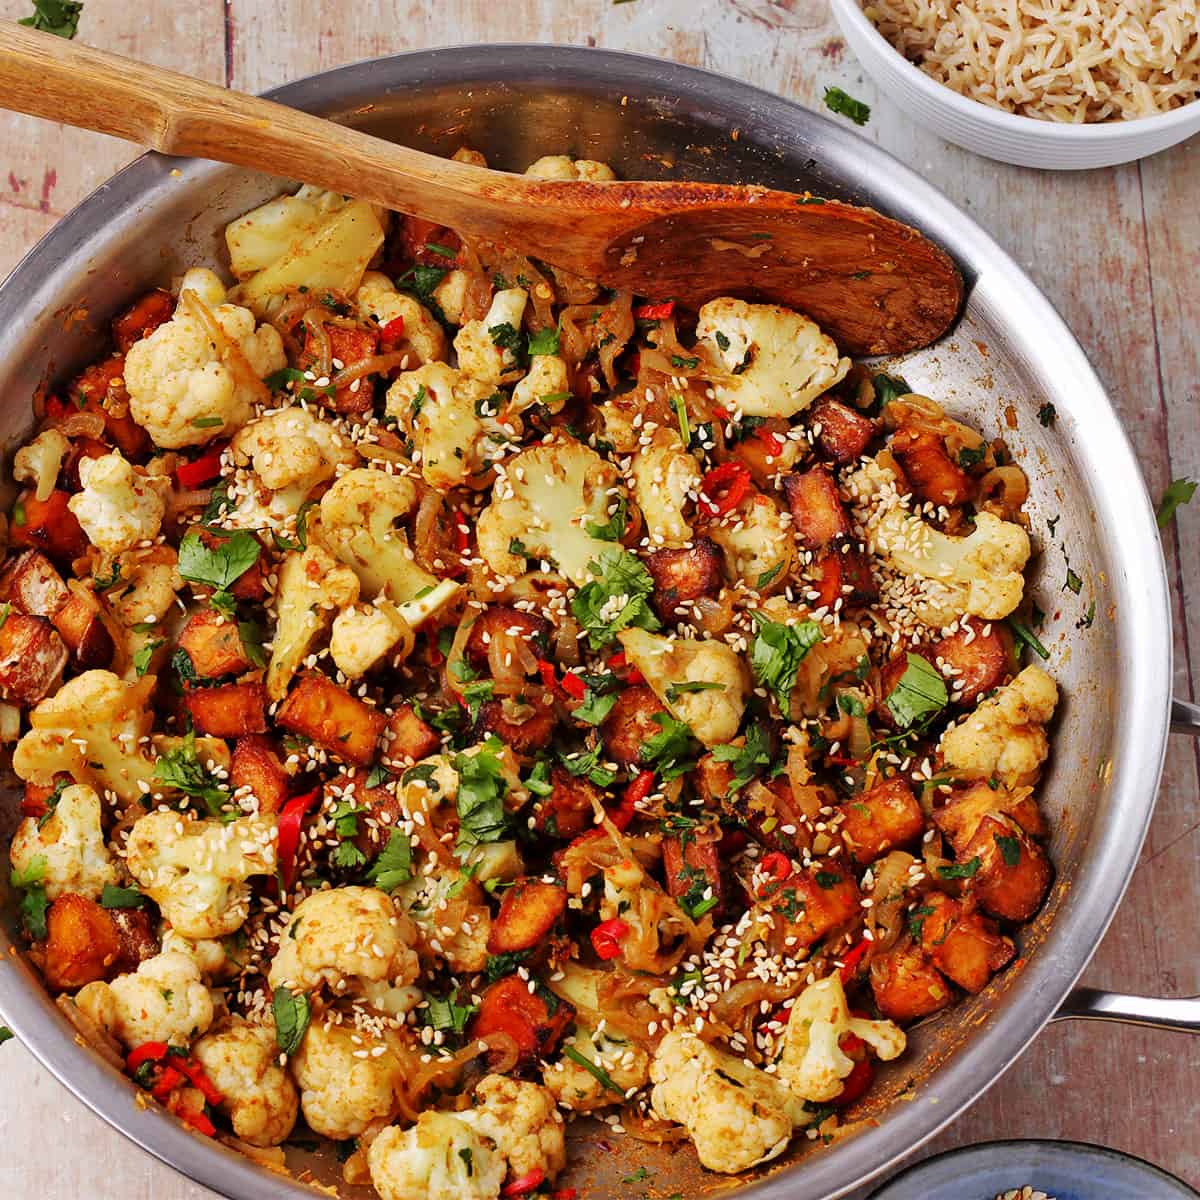 A skillet filled with stir fried cauliflower and tofu with onions, red chili, cilantro, and sesame seeds.